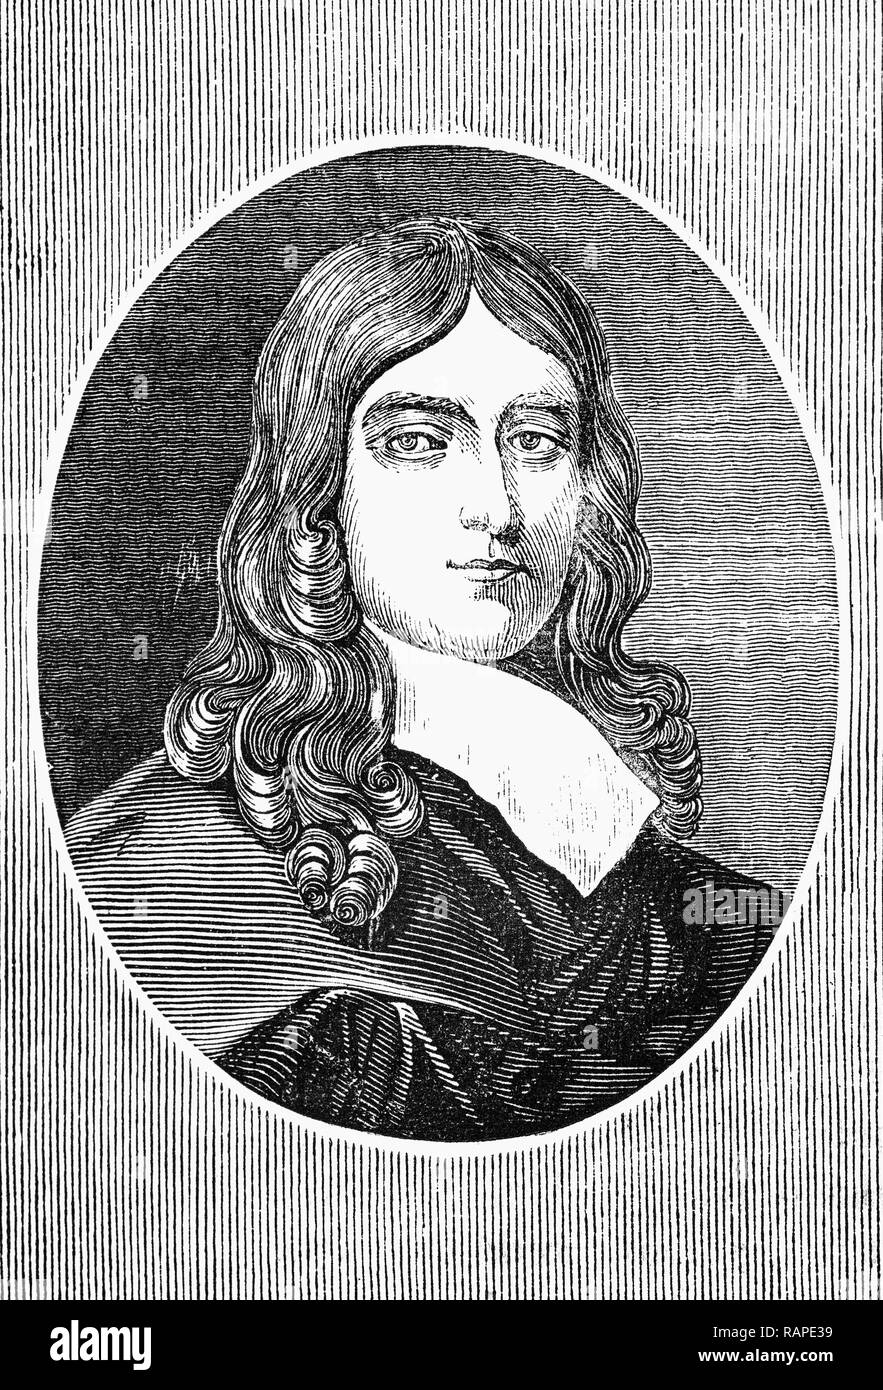 John Milton (1608-1674), was an English poet, polemicist, man of letters, and civil servant for the Commonwealth of England under its Council of State and later under Oliver Cromwell. He wrote at a time of religious flux and political upheaval, and is best known for his epic poem Paradise Lost (1667), written in blank verse. Stock Photo